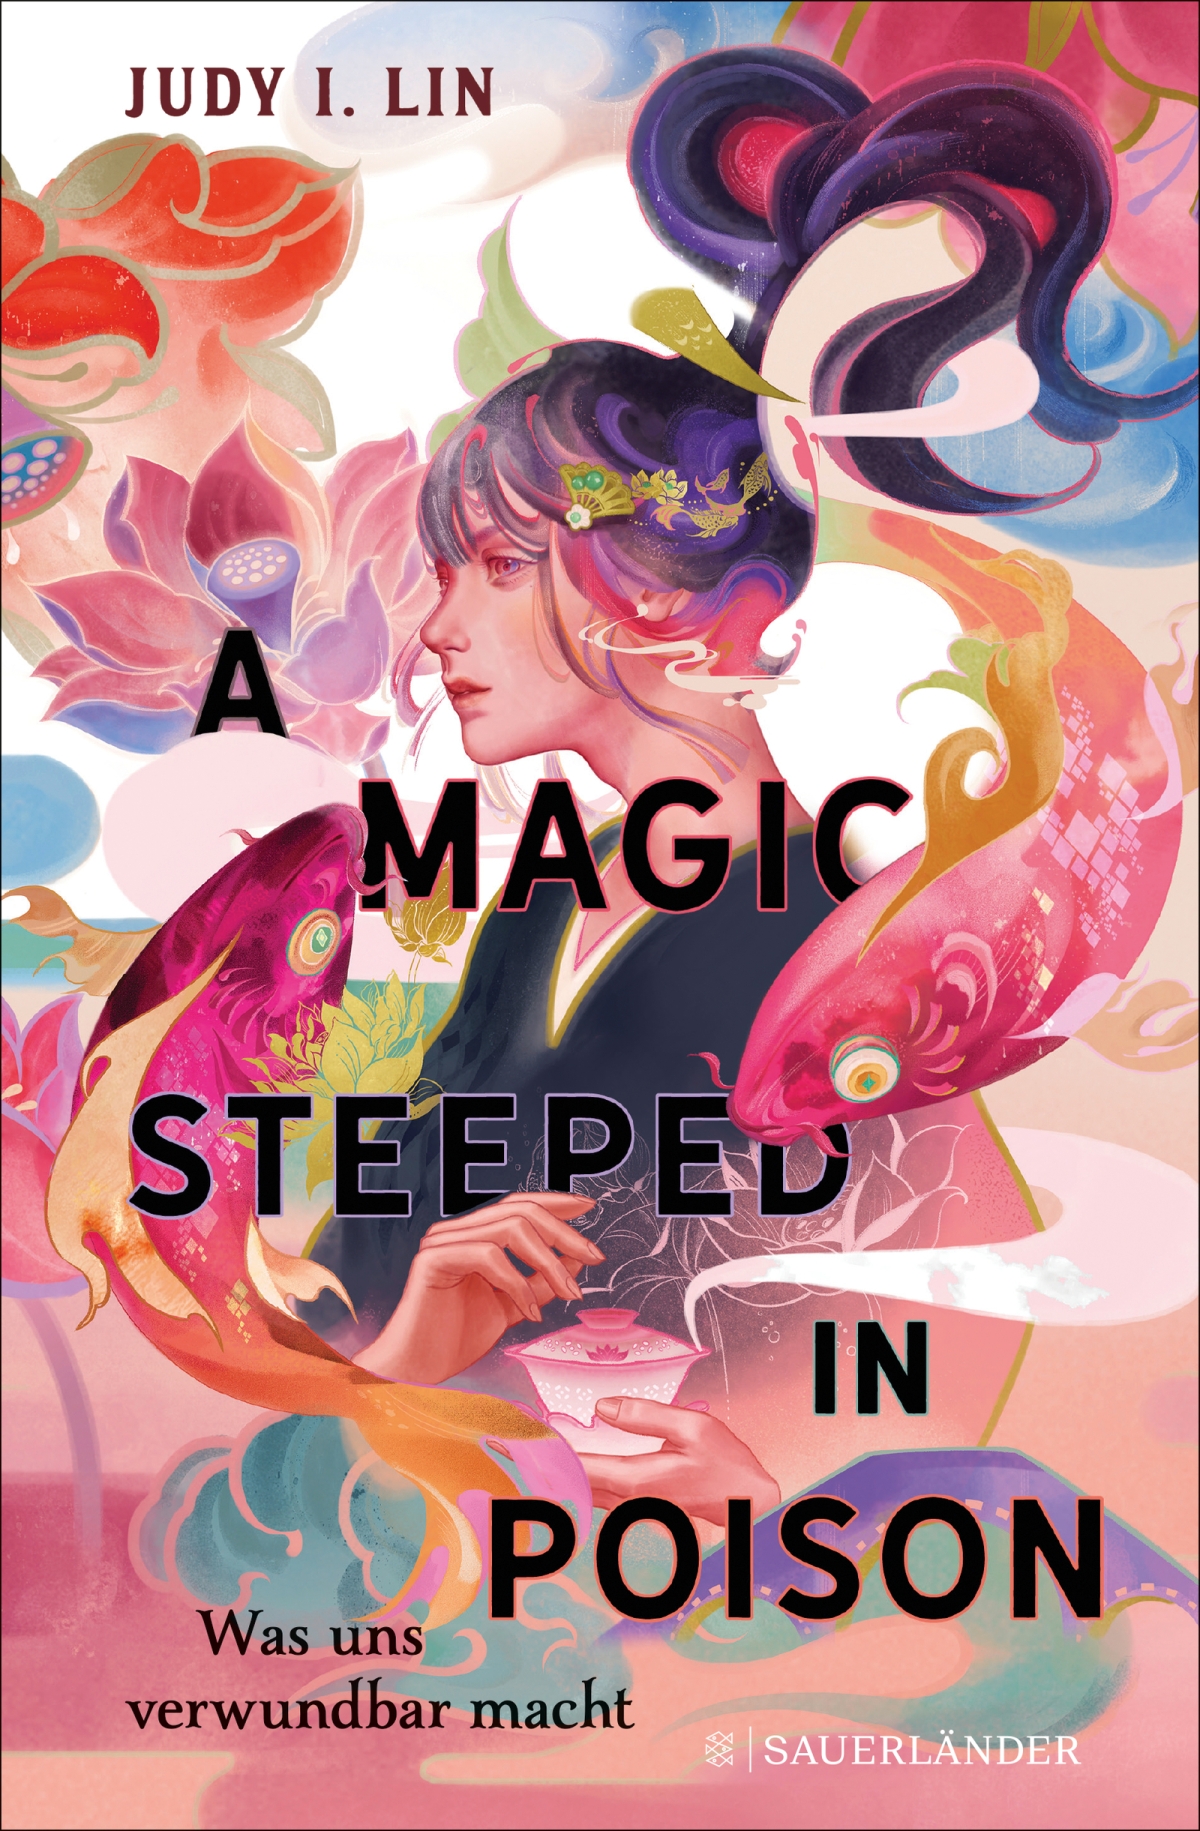 Judy I. Lin: Magic steeped in Poison